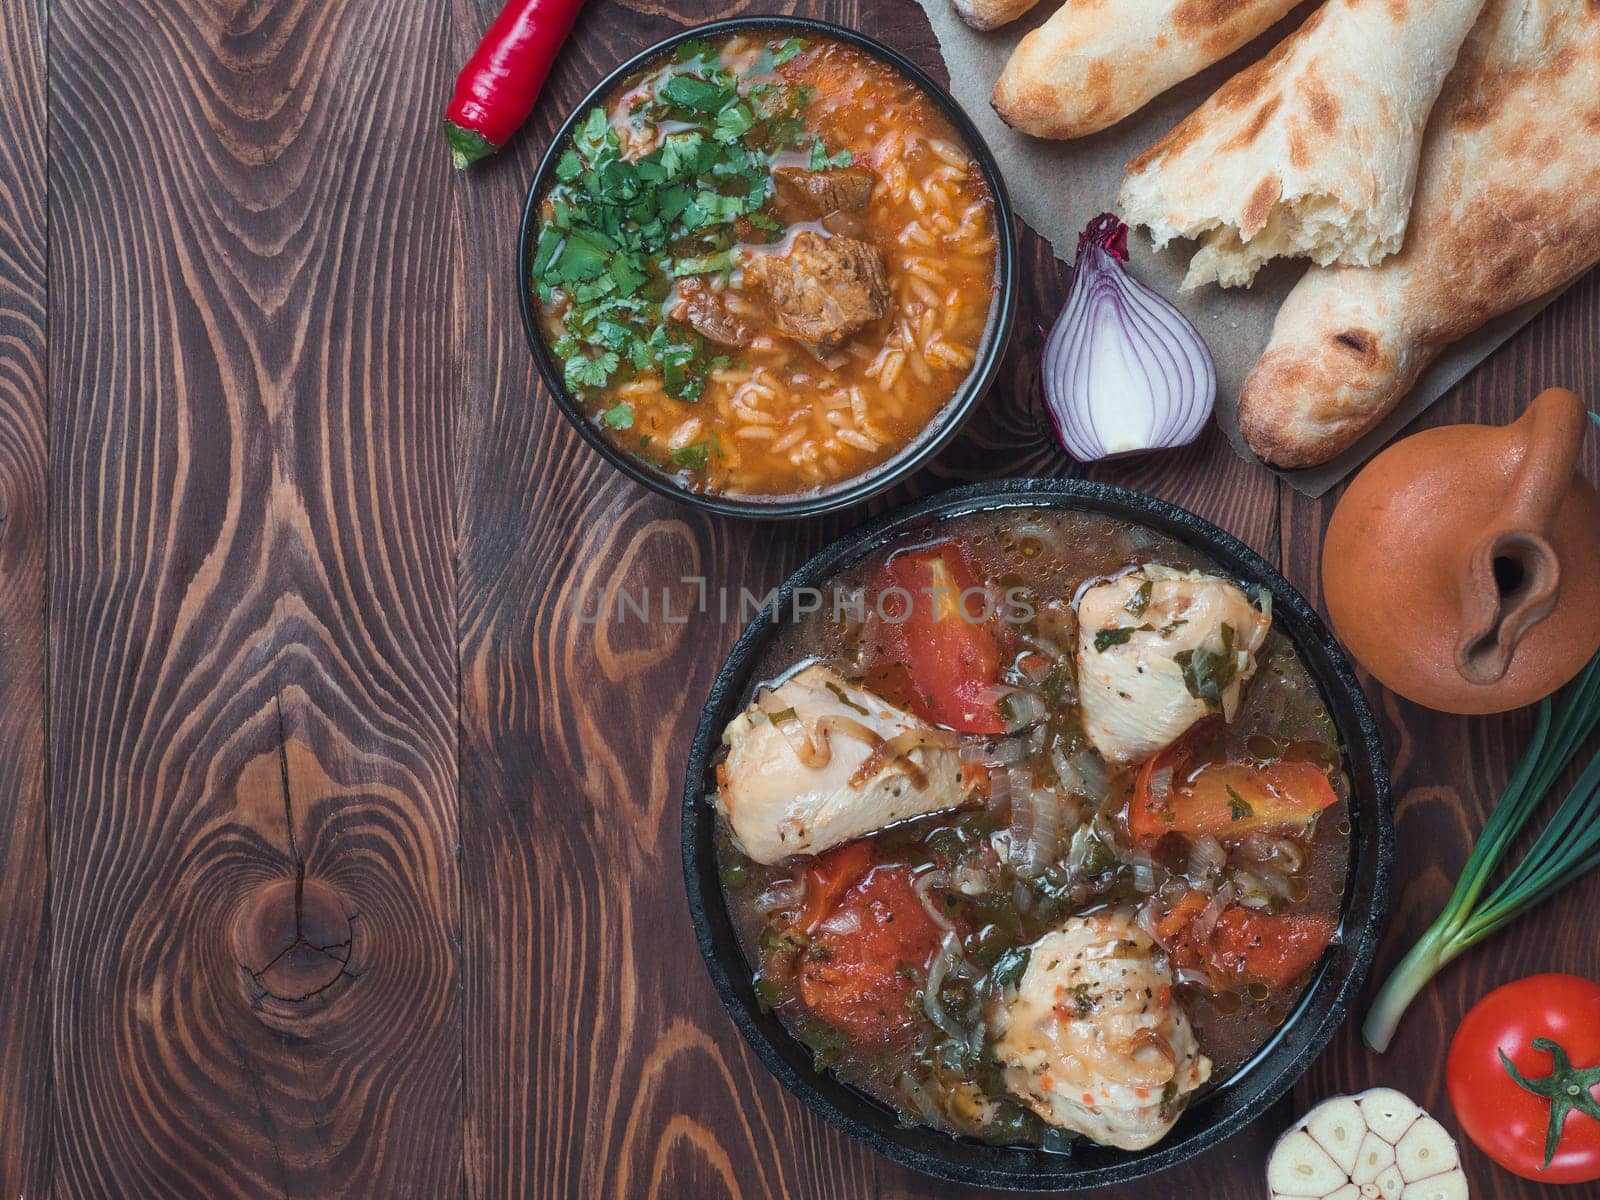 Traditional Georgian kitchen - spicy Kharcho soup and chicken Chachochbili, traditional bread Shotis Puri, vintage wine jar, fresh vegetables on wooden table. Copy space for text. Top view